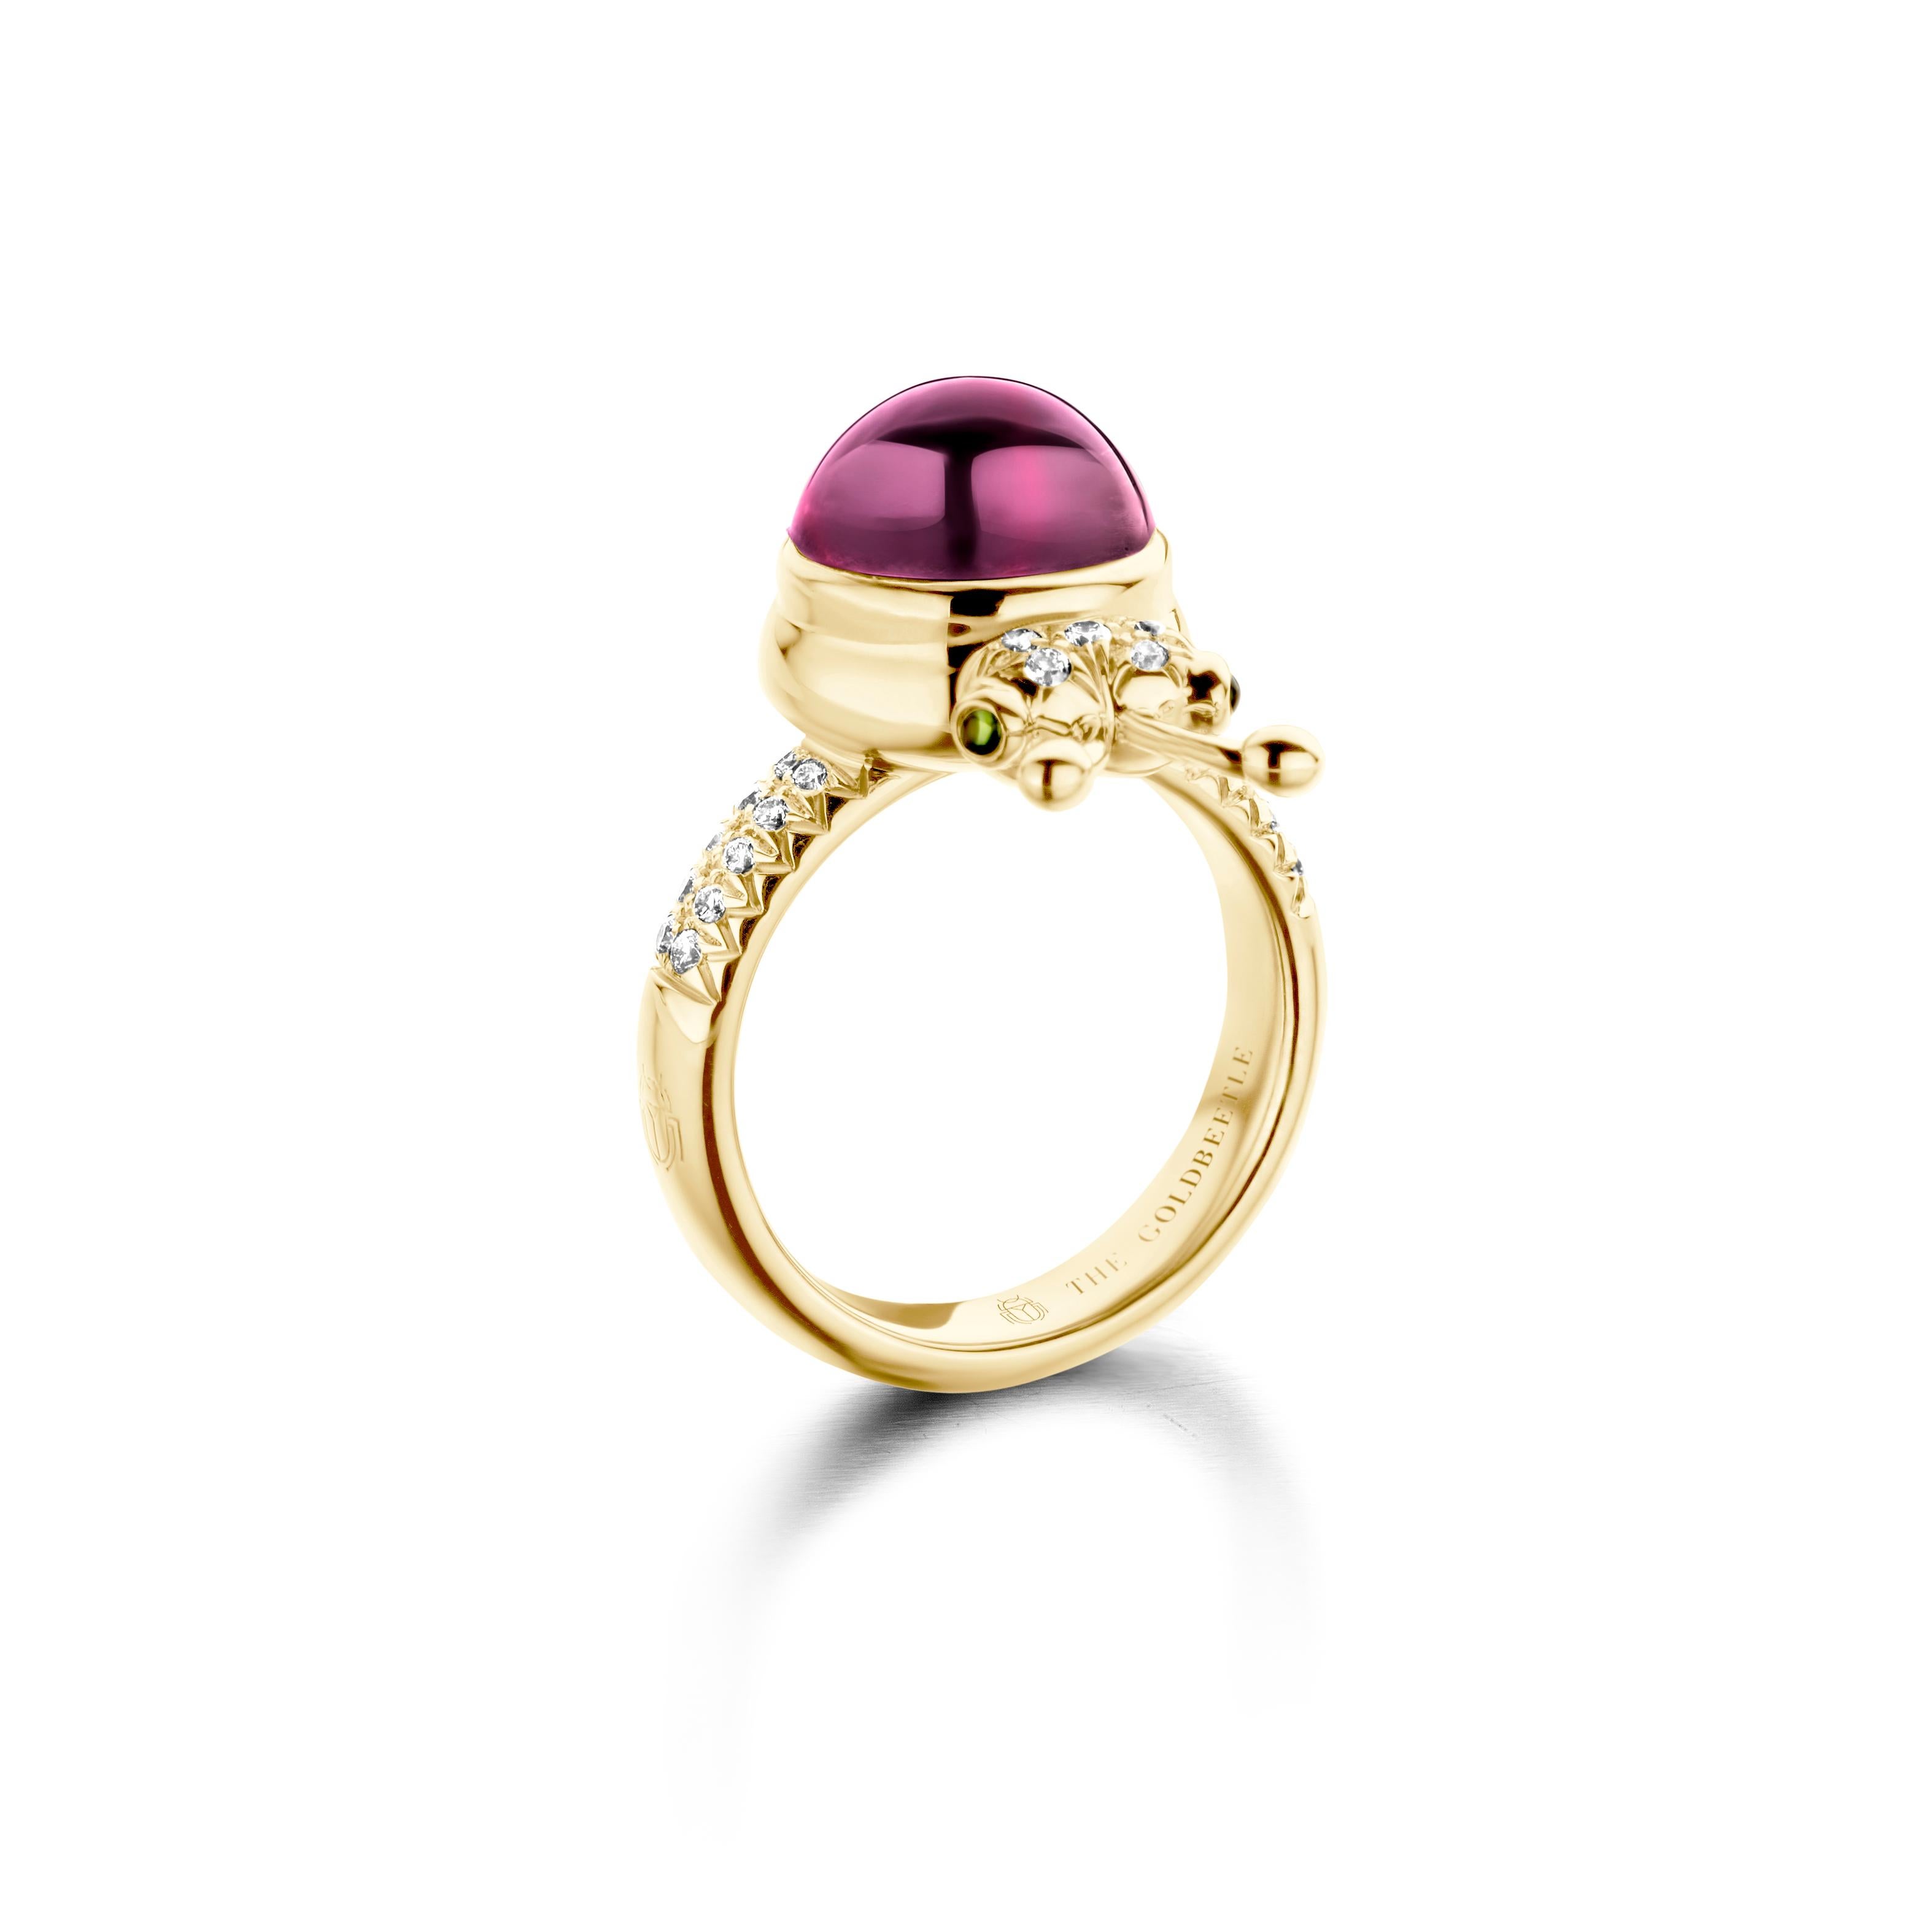 One-of-a-kind lucky beetle ring in 18-Karat yellow gold 10g set with the finest natural diamonds in brilliant cut 0,23 Carat (VVS/DEF quality) one natural, rhodolite garnet in round cabochon cut 6,00 Carat and two tsavorites in round cabochon cut.